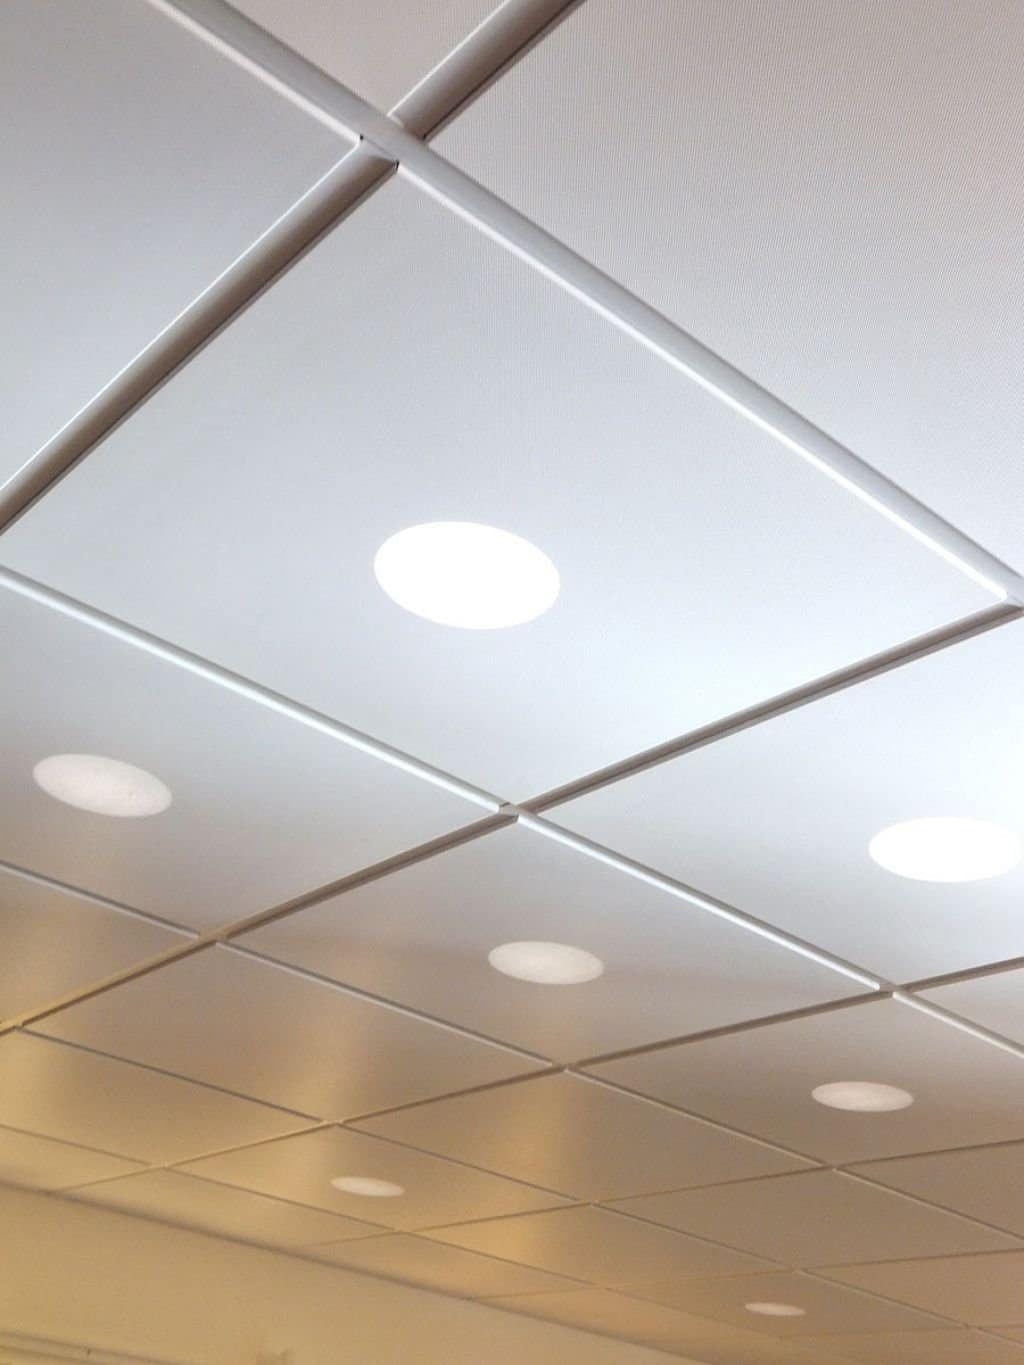 Ceiling Tiles Can Lights Ceiling Tiles Can Lights acoustical ceiling tiles with recessed lights types of ceiling 1024 X 1365